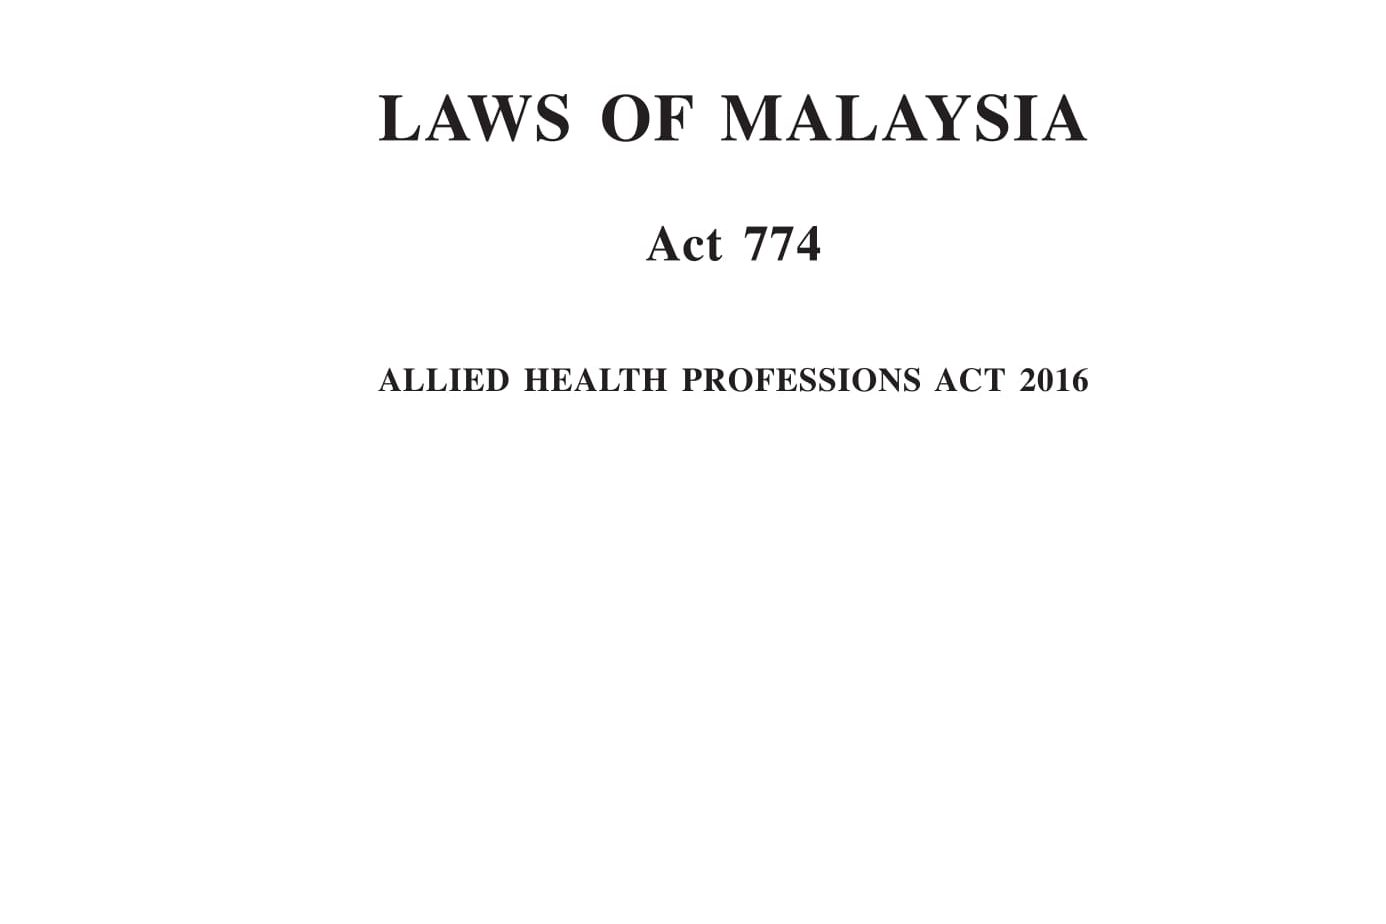 ALLIED HEALTH PROFESSIONS ACT 2016, ACT 774